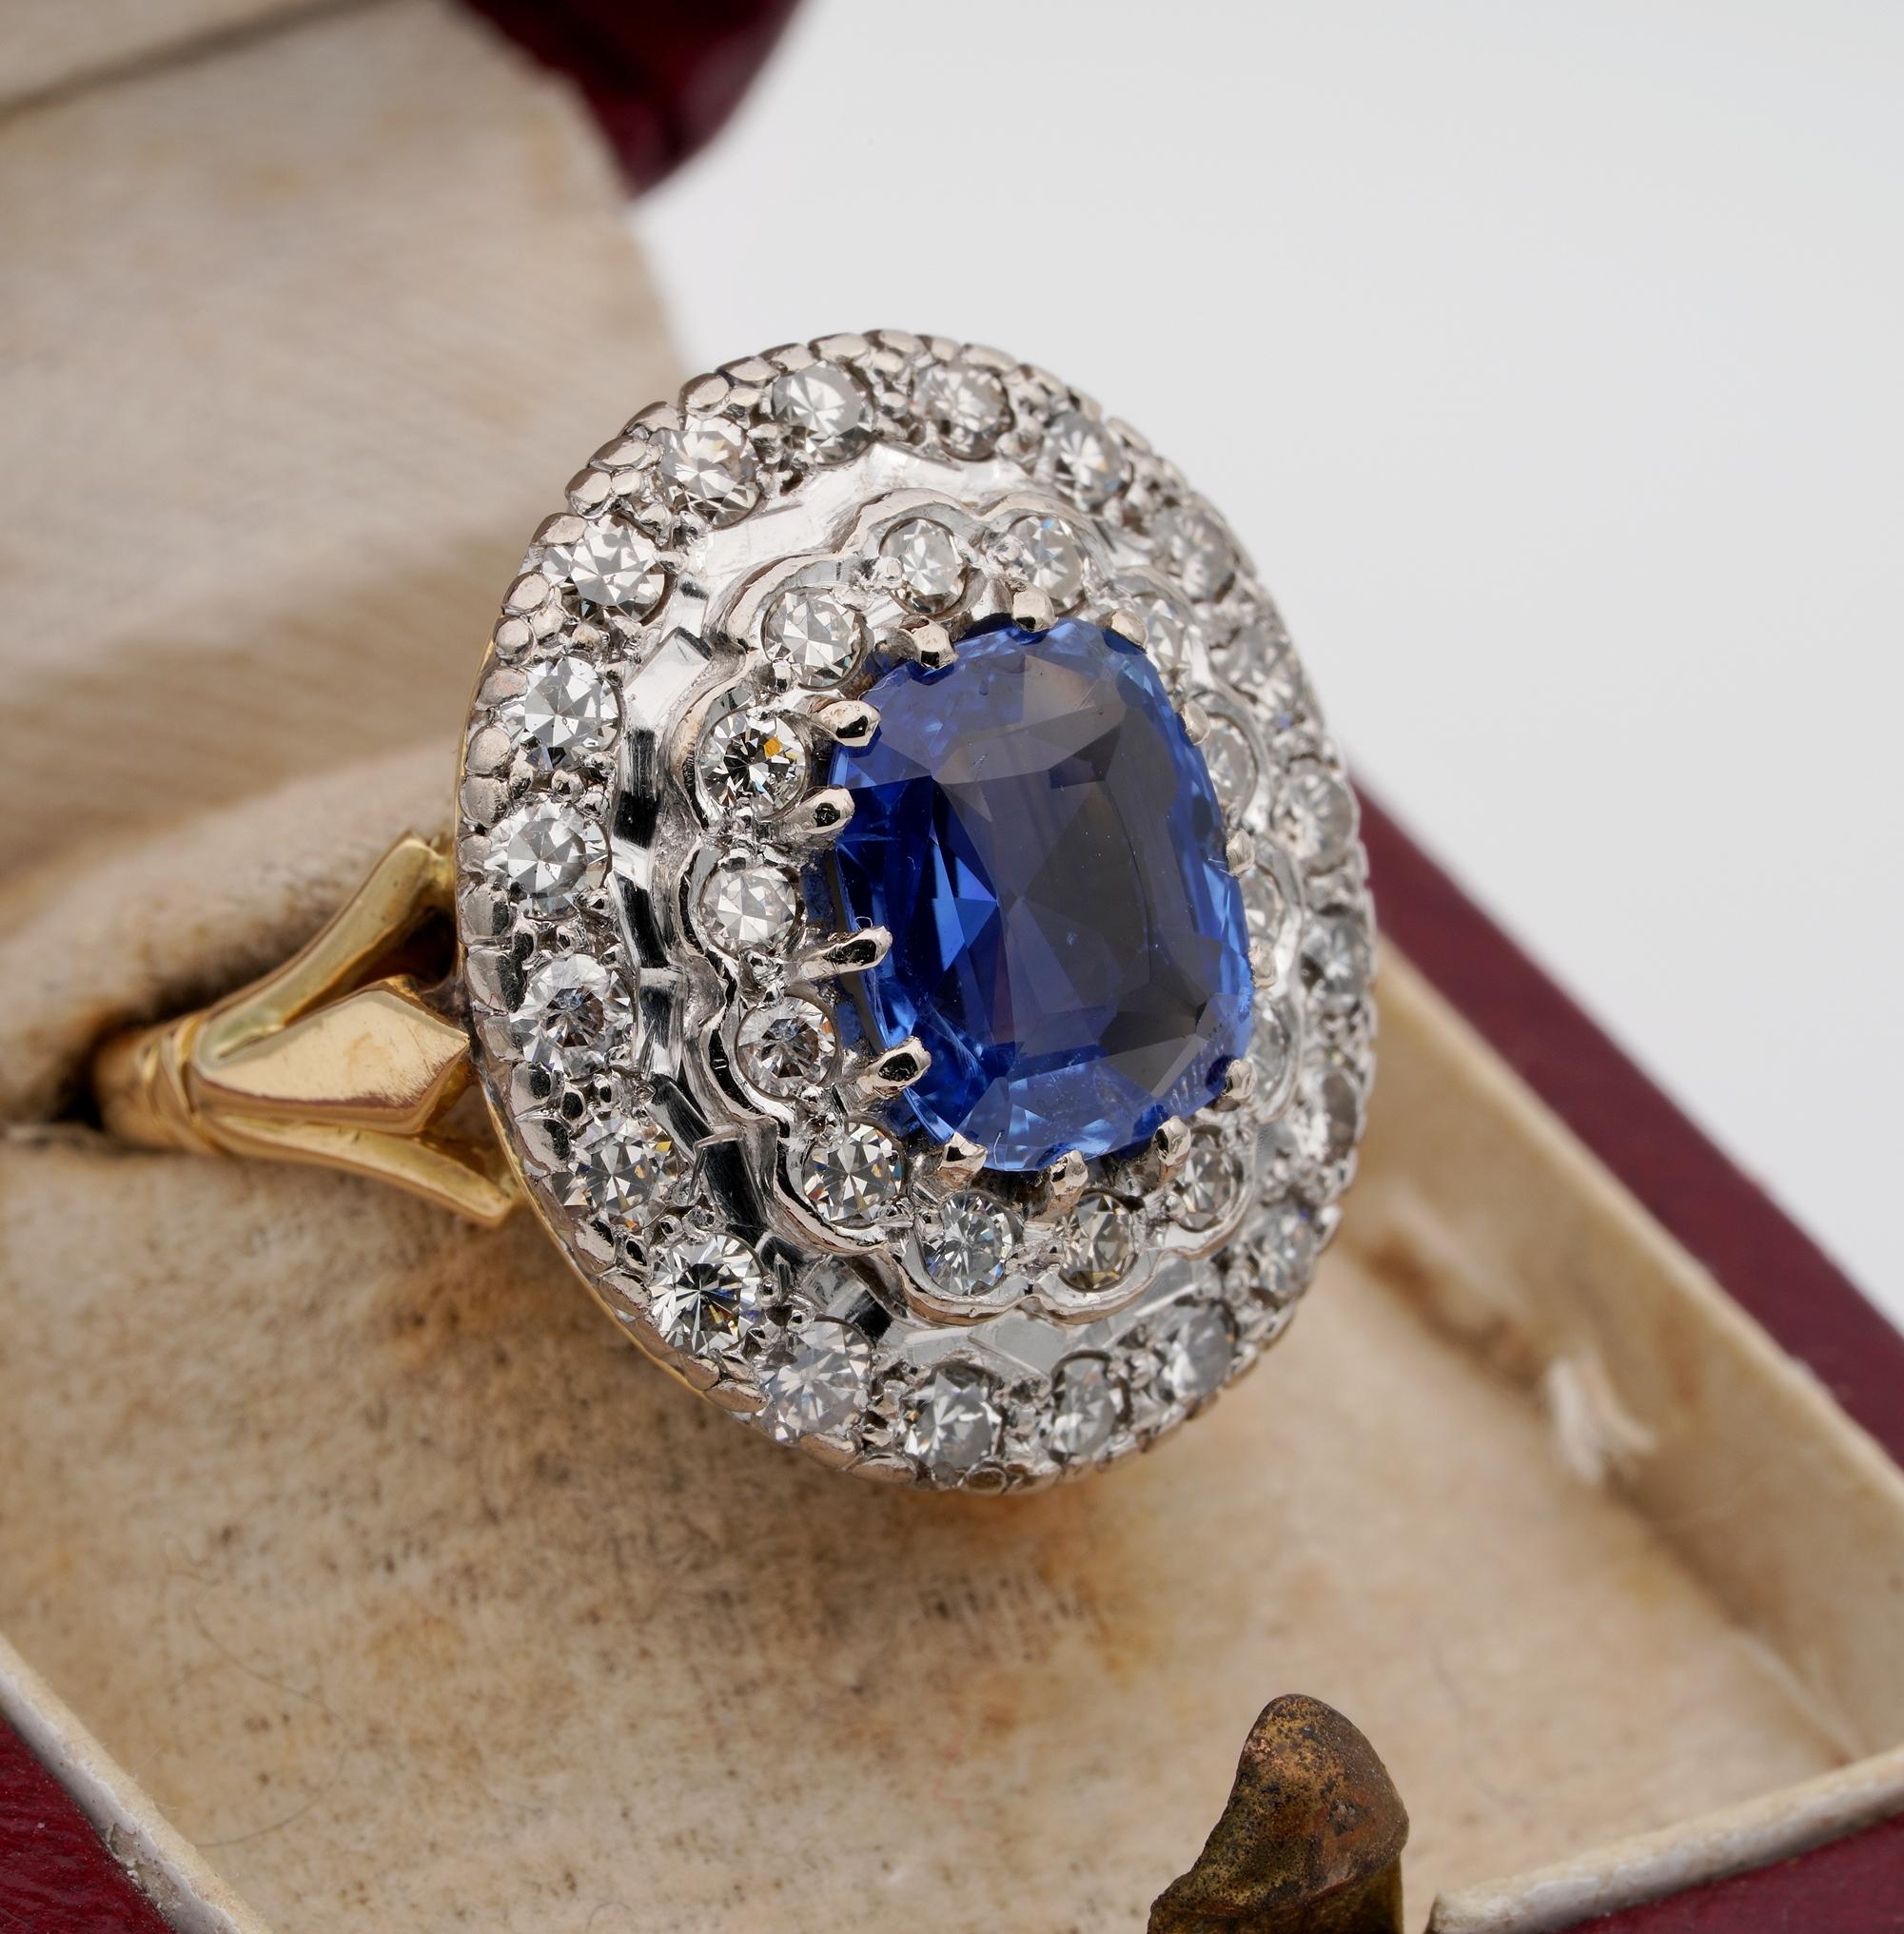 Past Statement

Imposing classy style from the late Art Deco period designed in a large oval crown with two tiers of Diamonds surrounding a fantastic natural Sapphire, a statement ring from past times
Entirely hand crafted of solid Platinum for the